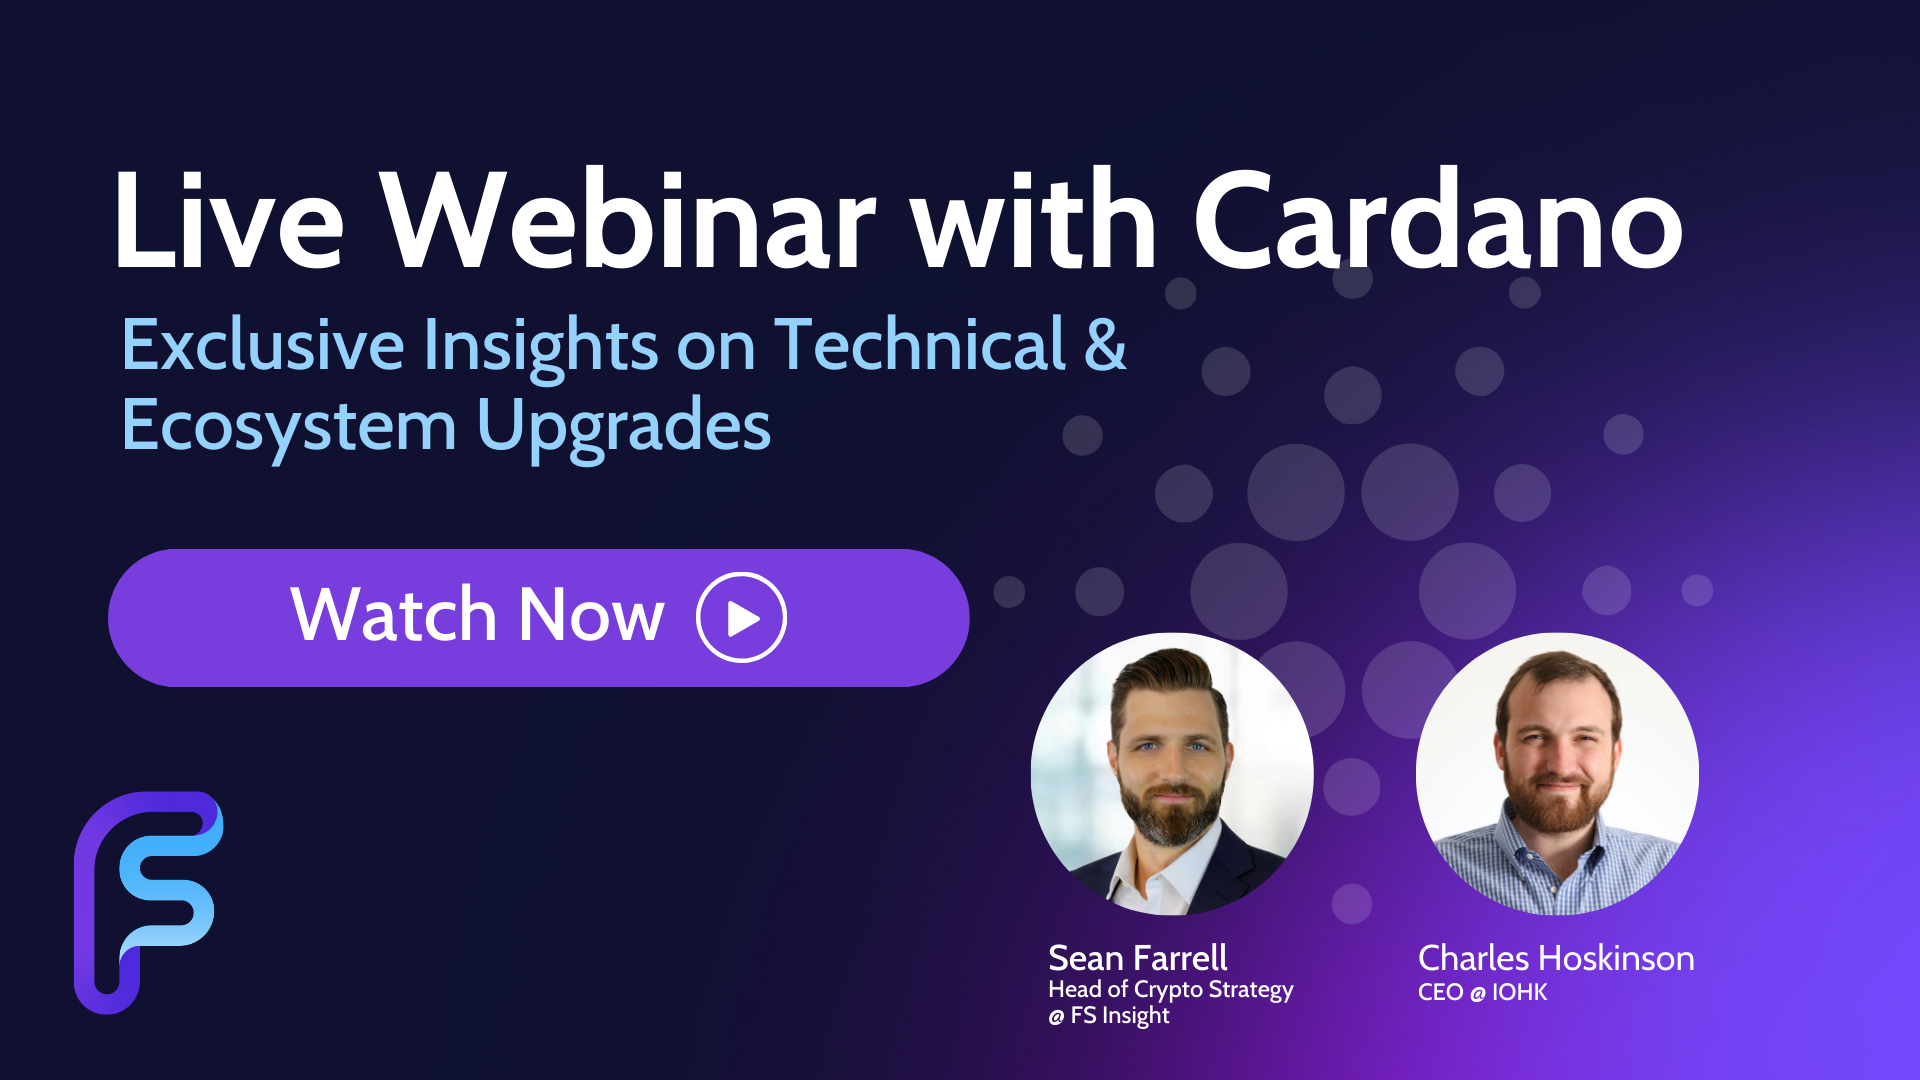 Cardano: Exclusive Insights on Technical & Ecosystem Upgrades to the Proof-of-Stake Blockchain